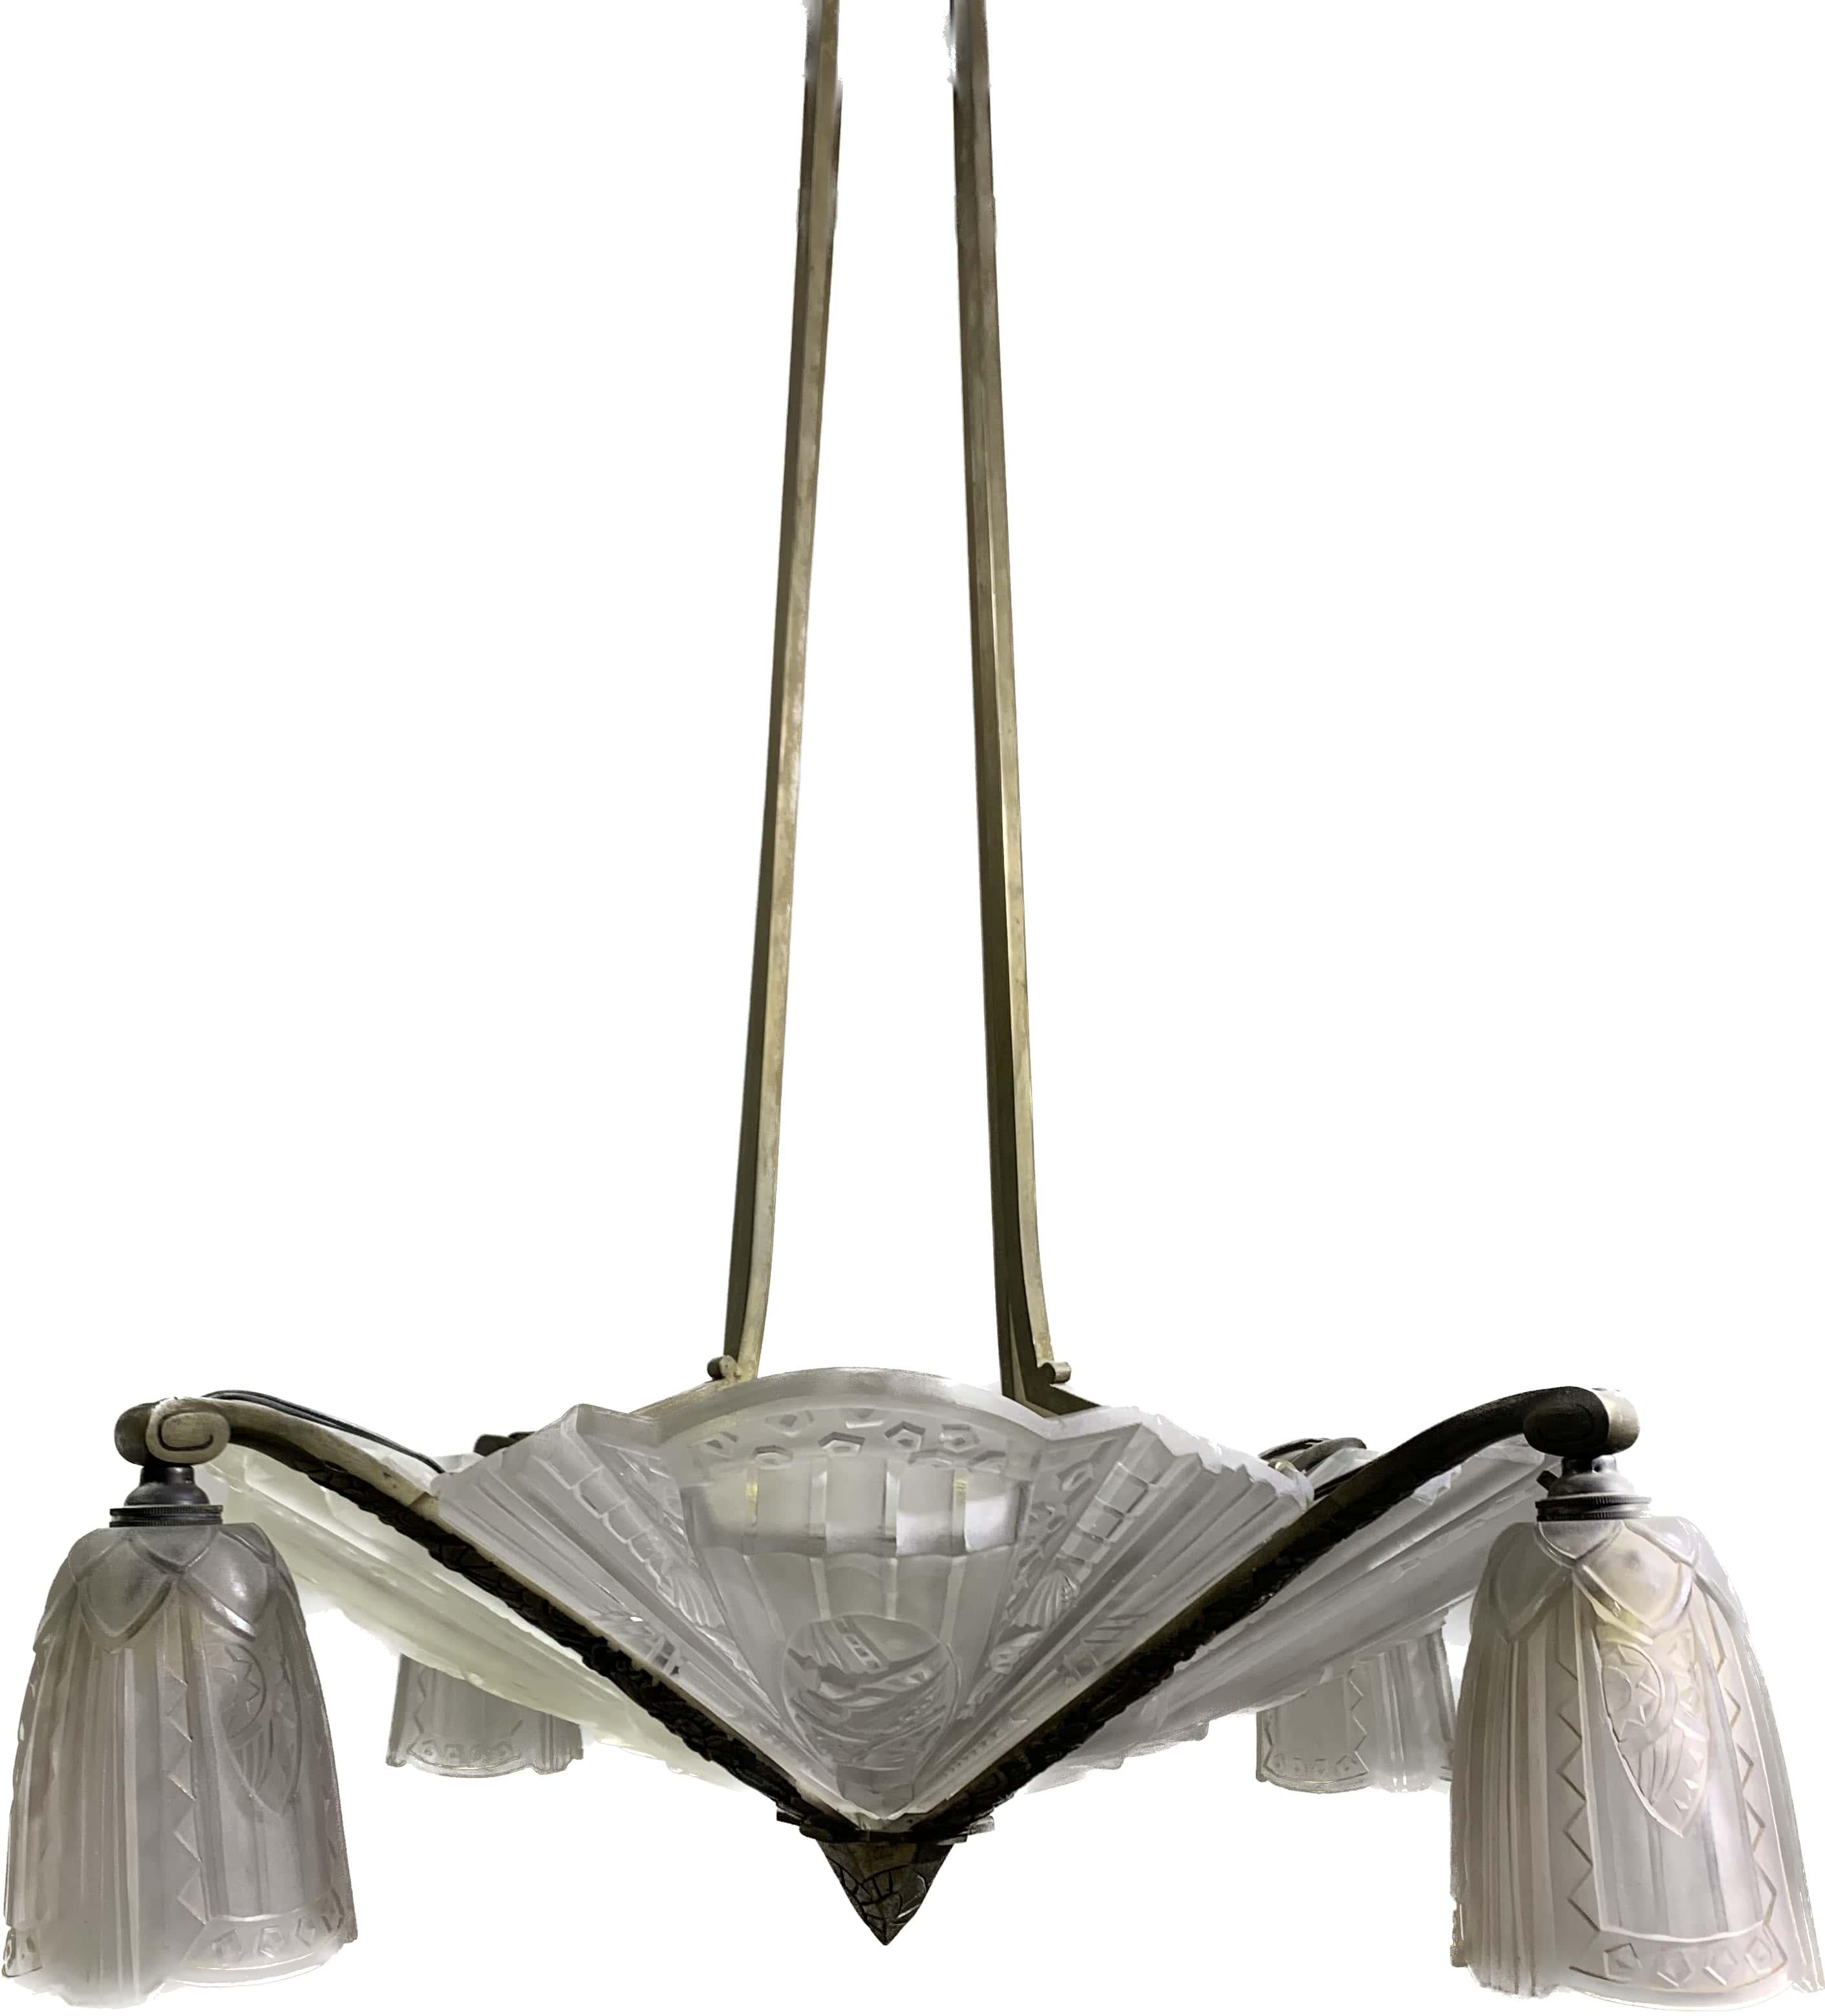 European French Art Deco Chandelier circa 1930 Signed Frontisi For Sale